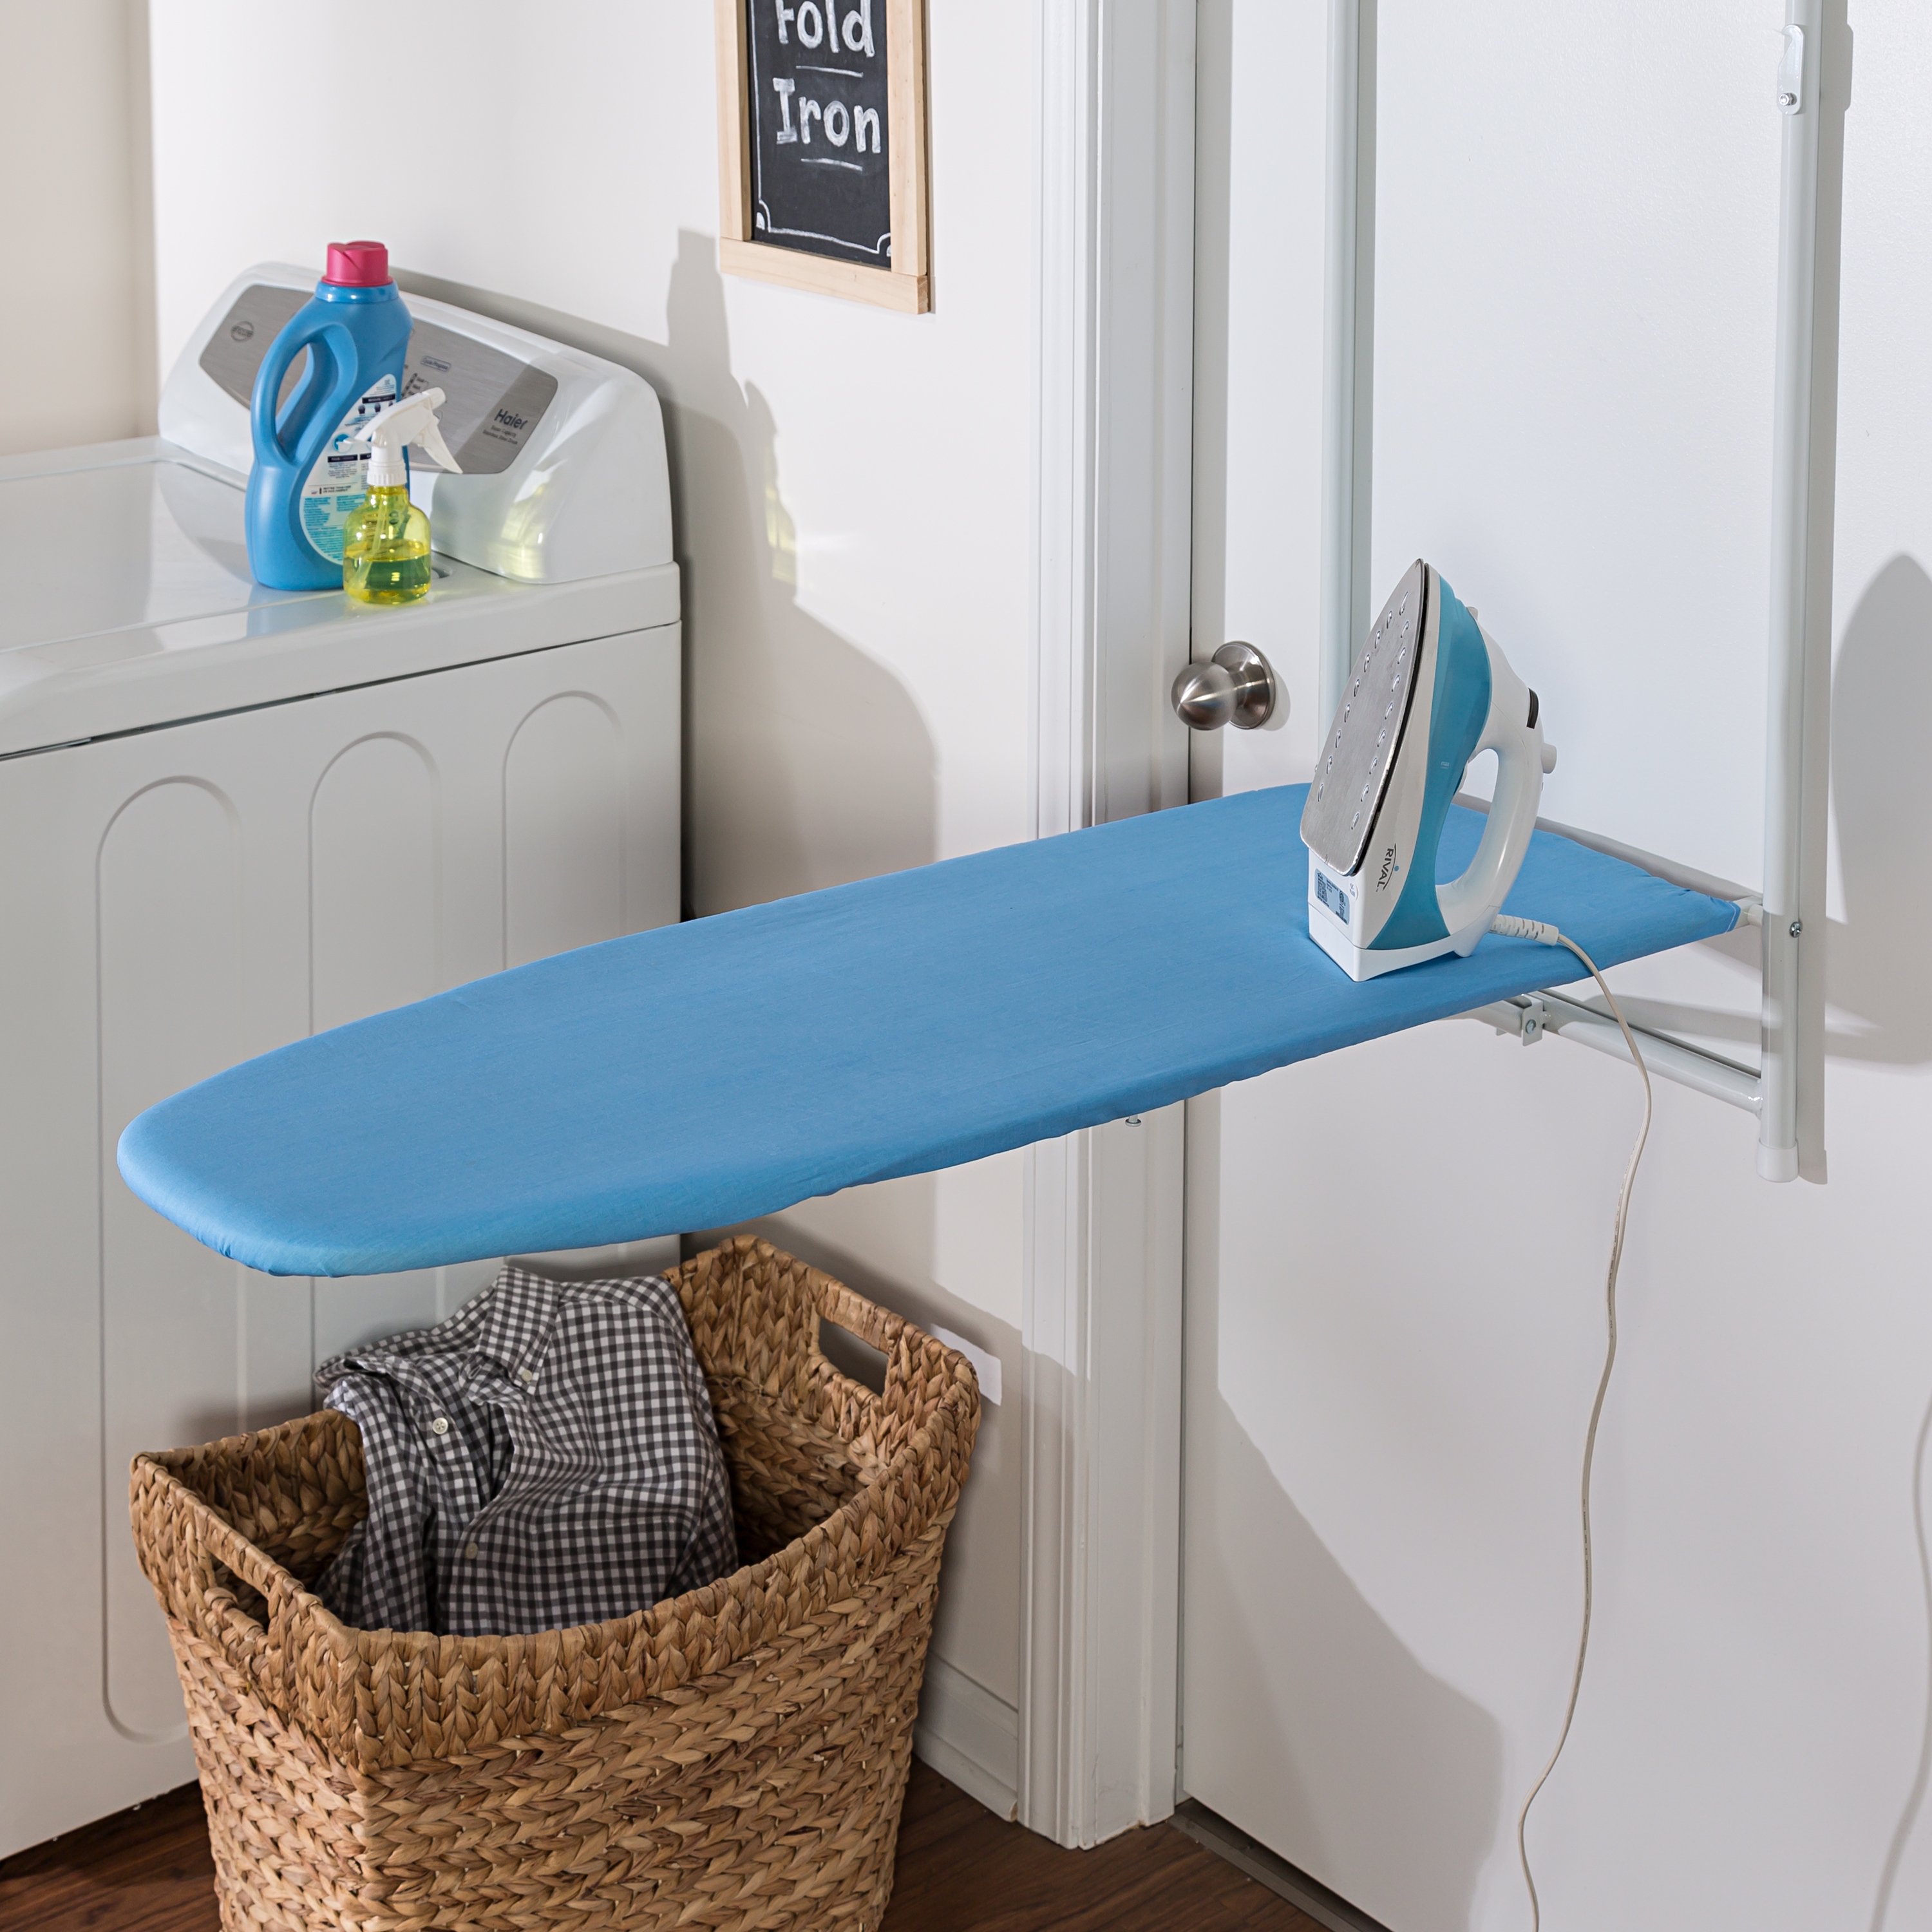 Honey-Can-Do Blue and White Hanging Over-The-Door Ironing Board - image 1 of 9